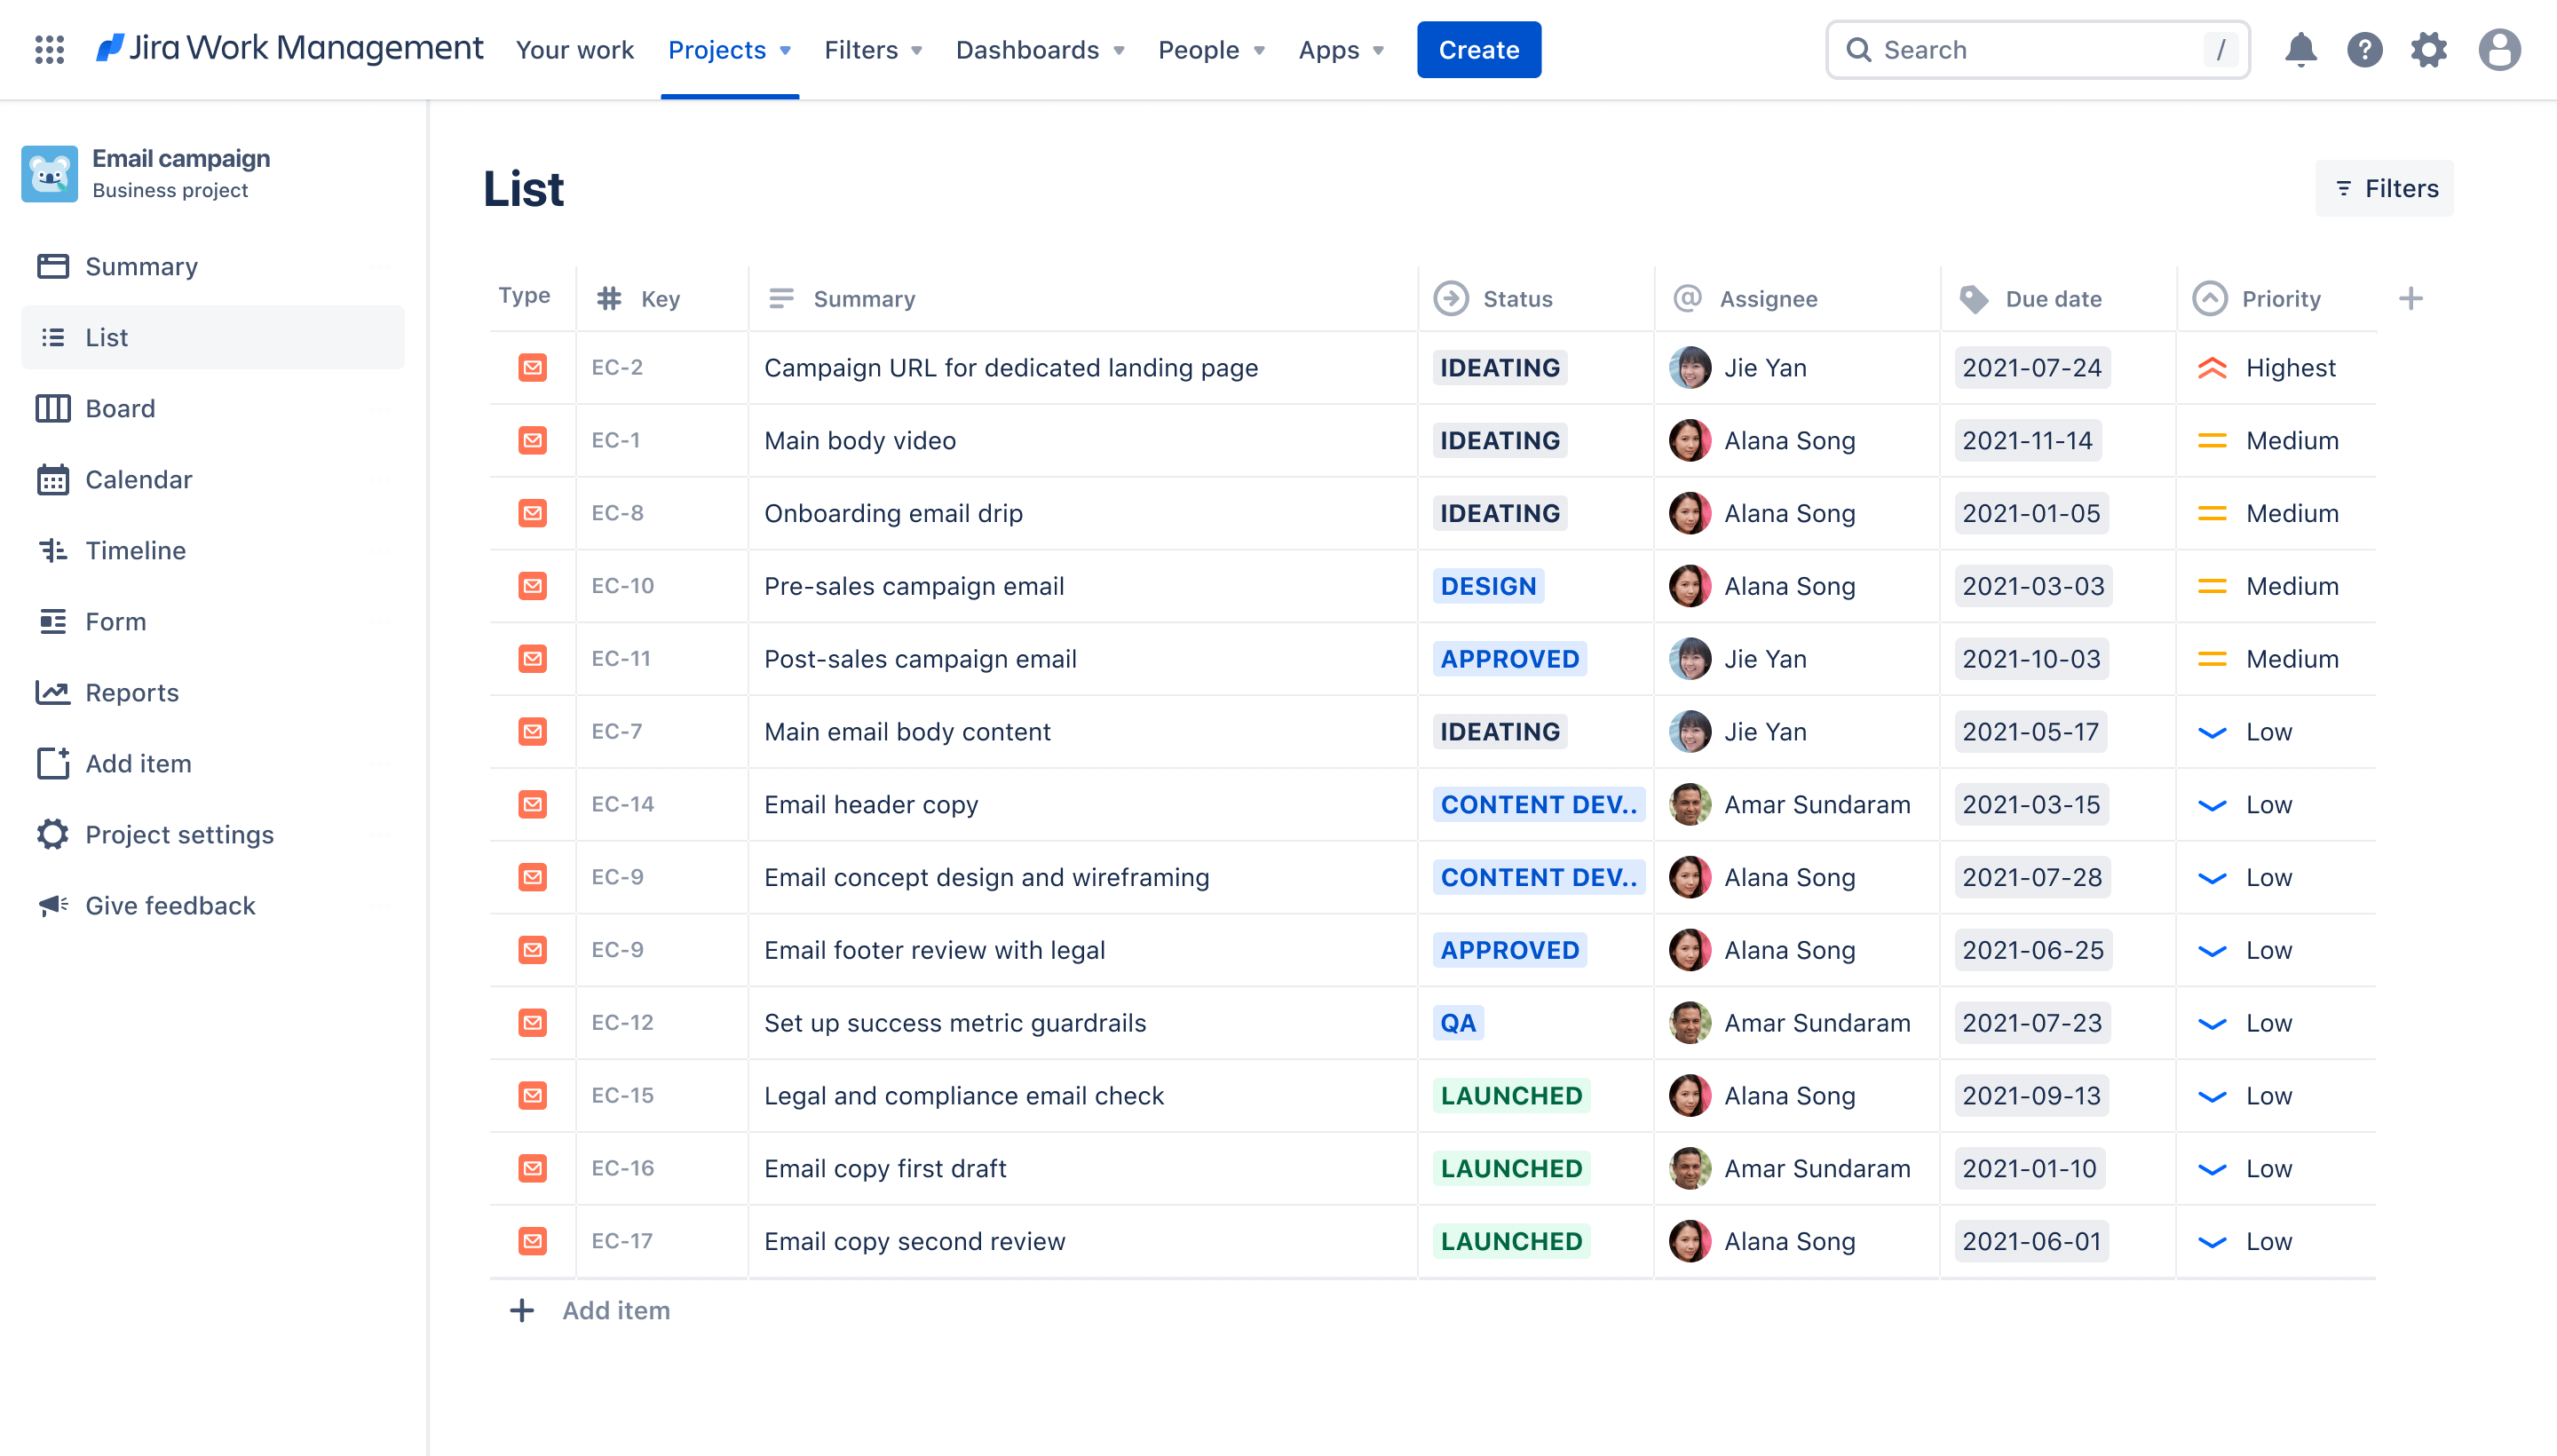 Email campaign list view in Jira WOrk management